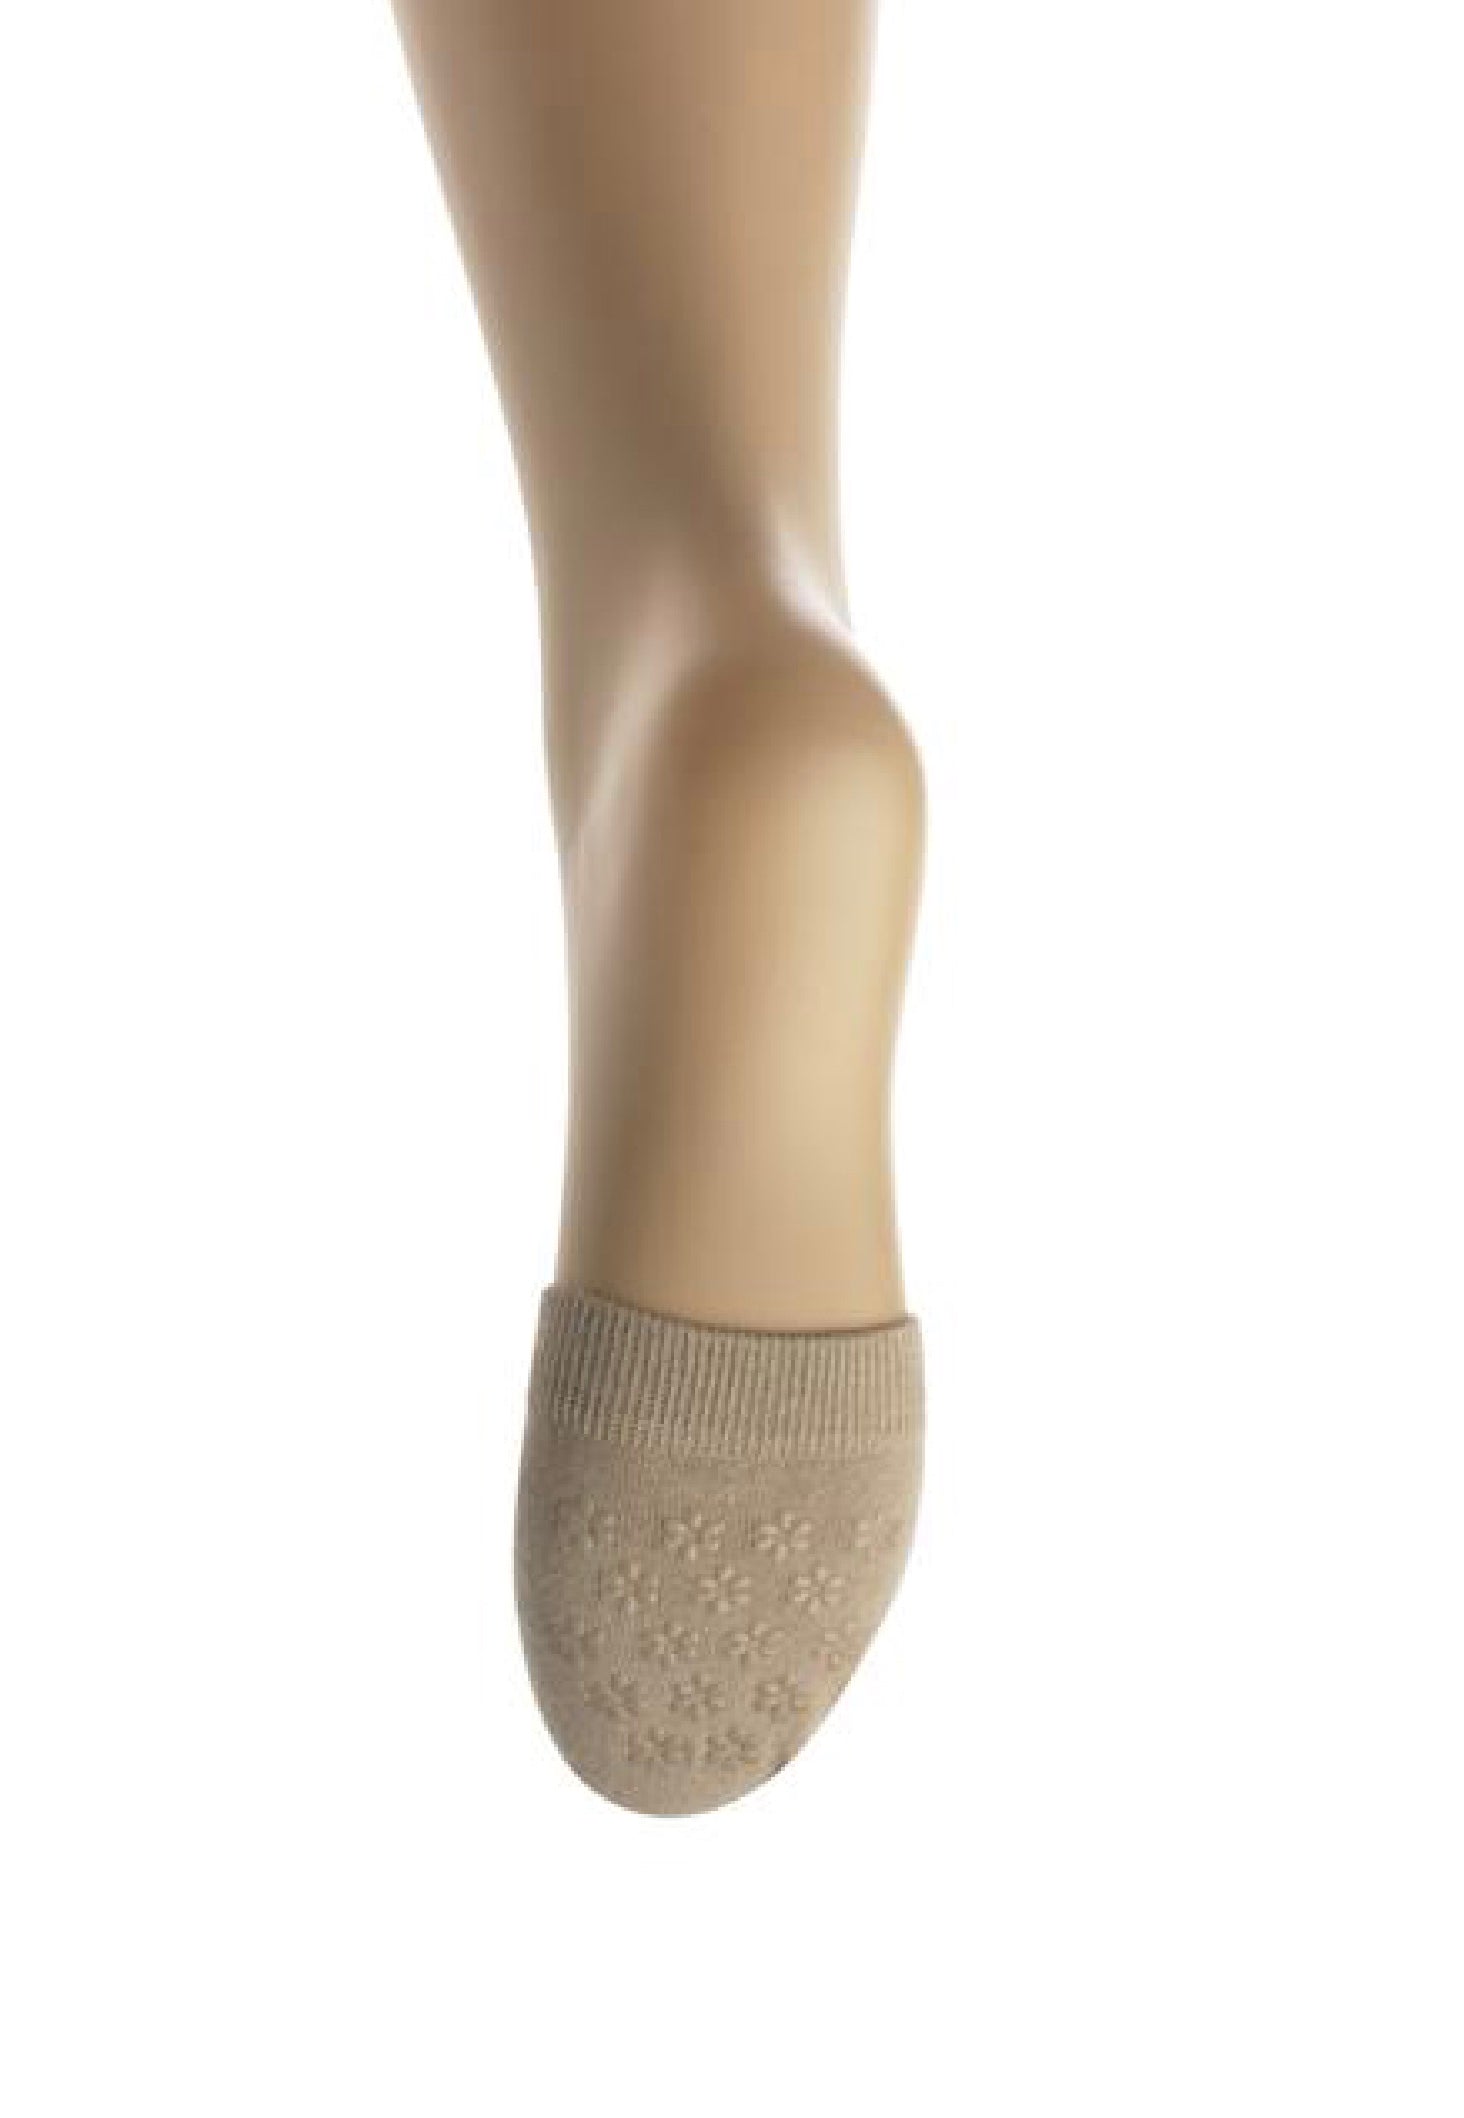 Bonnie Doon Toe Cover with Puff Print BE611000 - beige toe cover sock with grip print sole